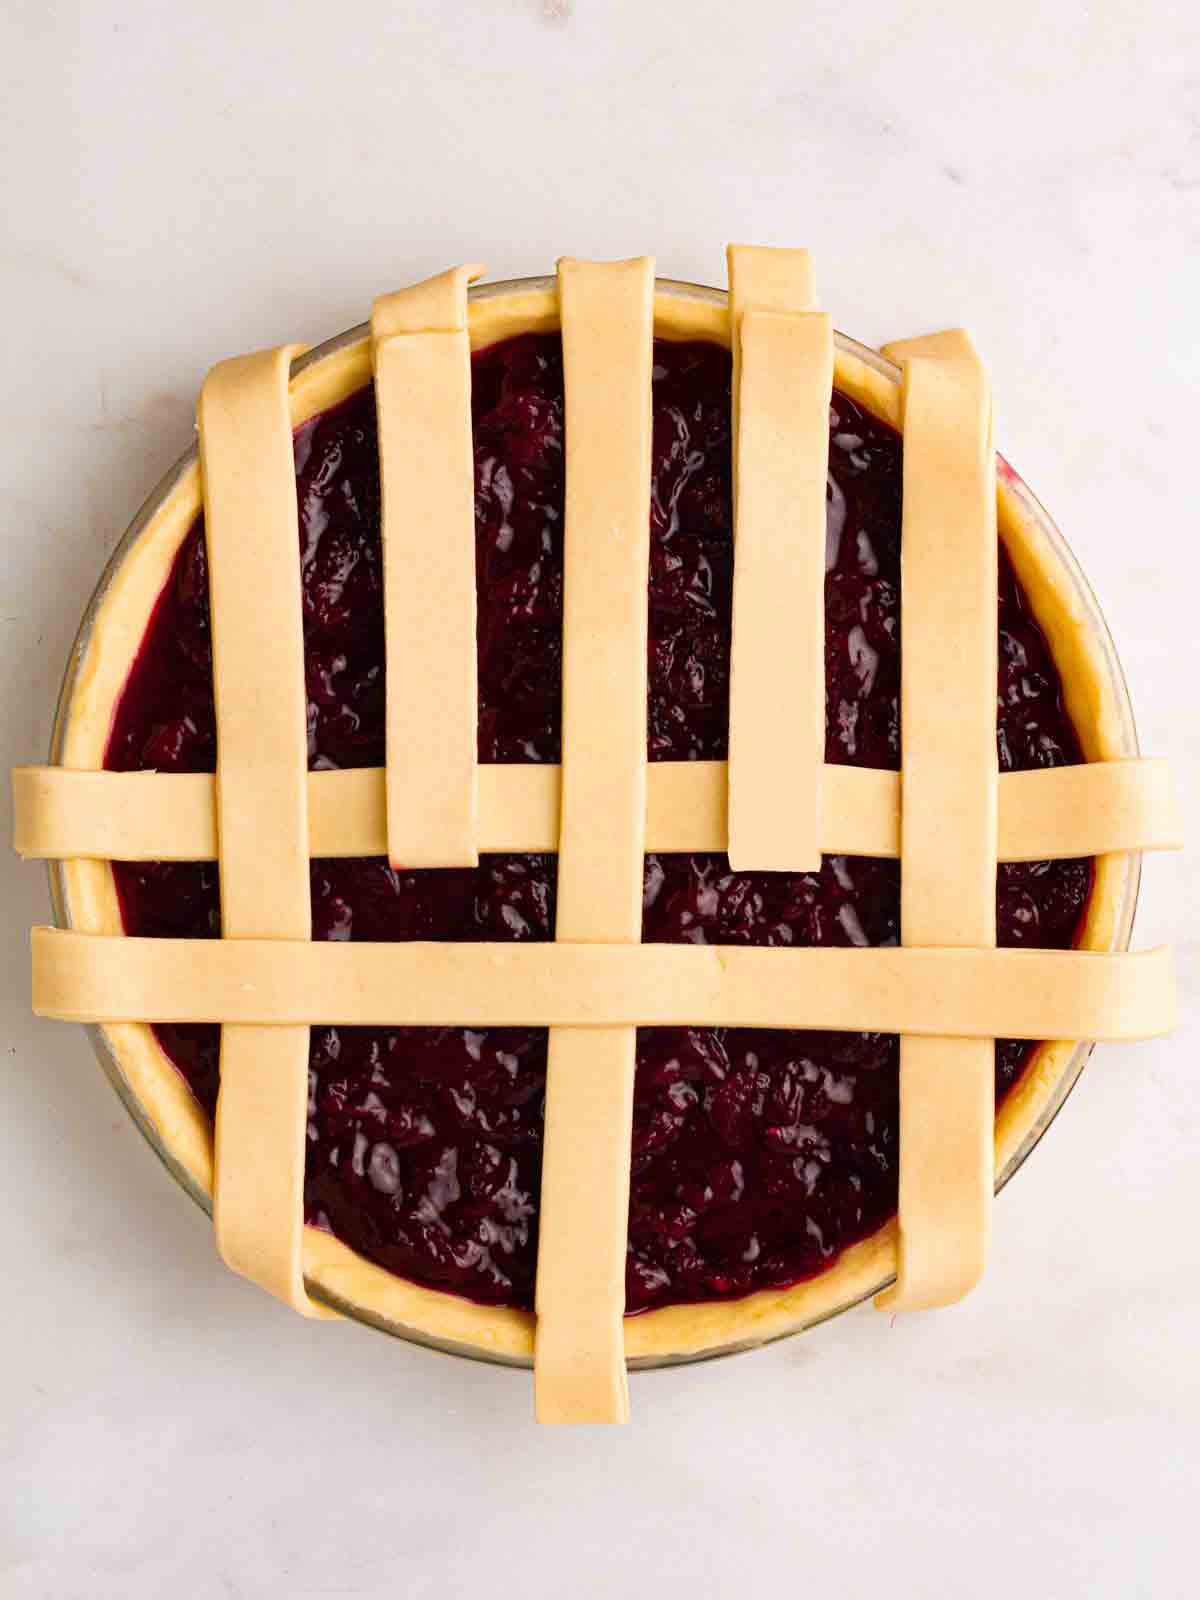 Looking down on an unbaked cherry pie, with a partially constructed lattice topping for step 6 in the recipe.